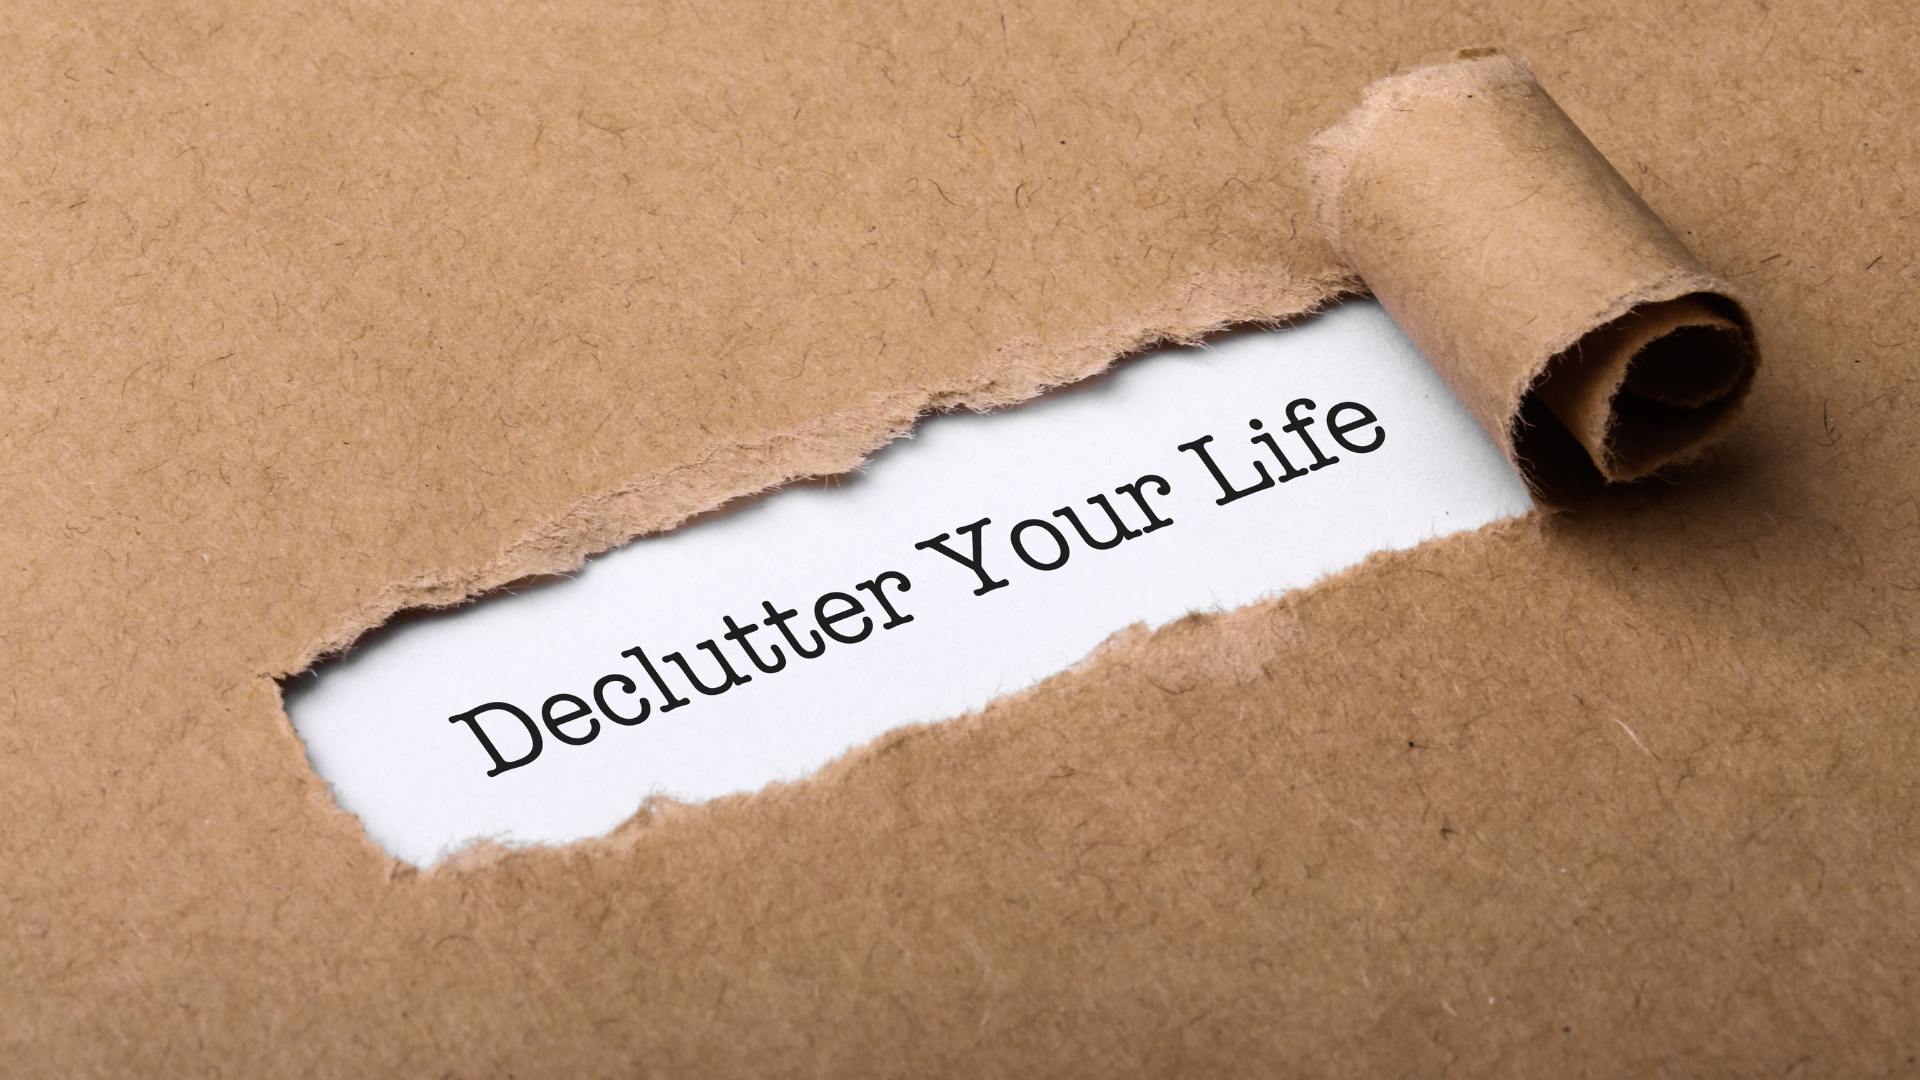 Cardboard ripped to reveal 'Declutter your life' in black text on white paper